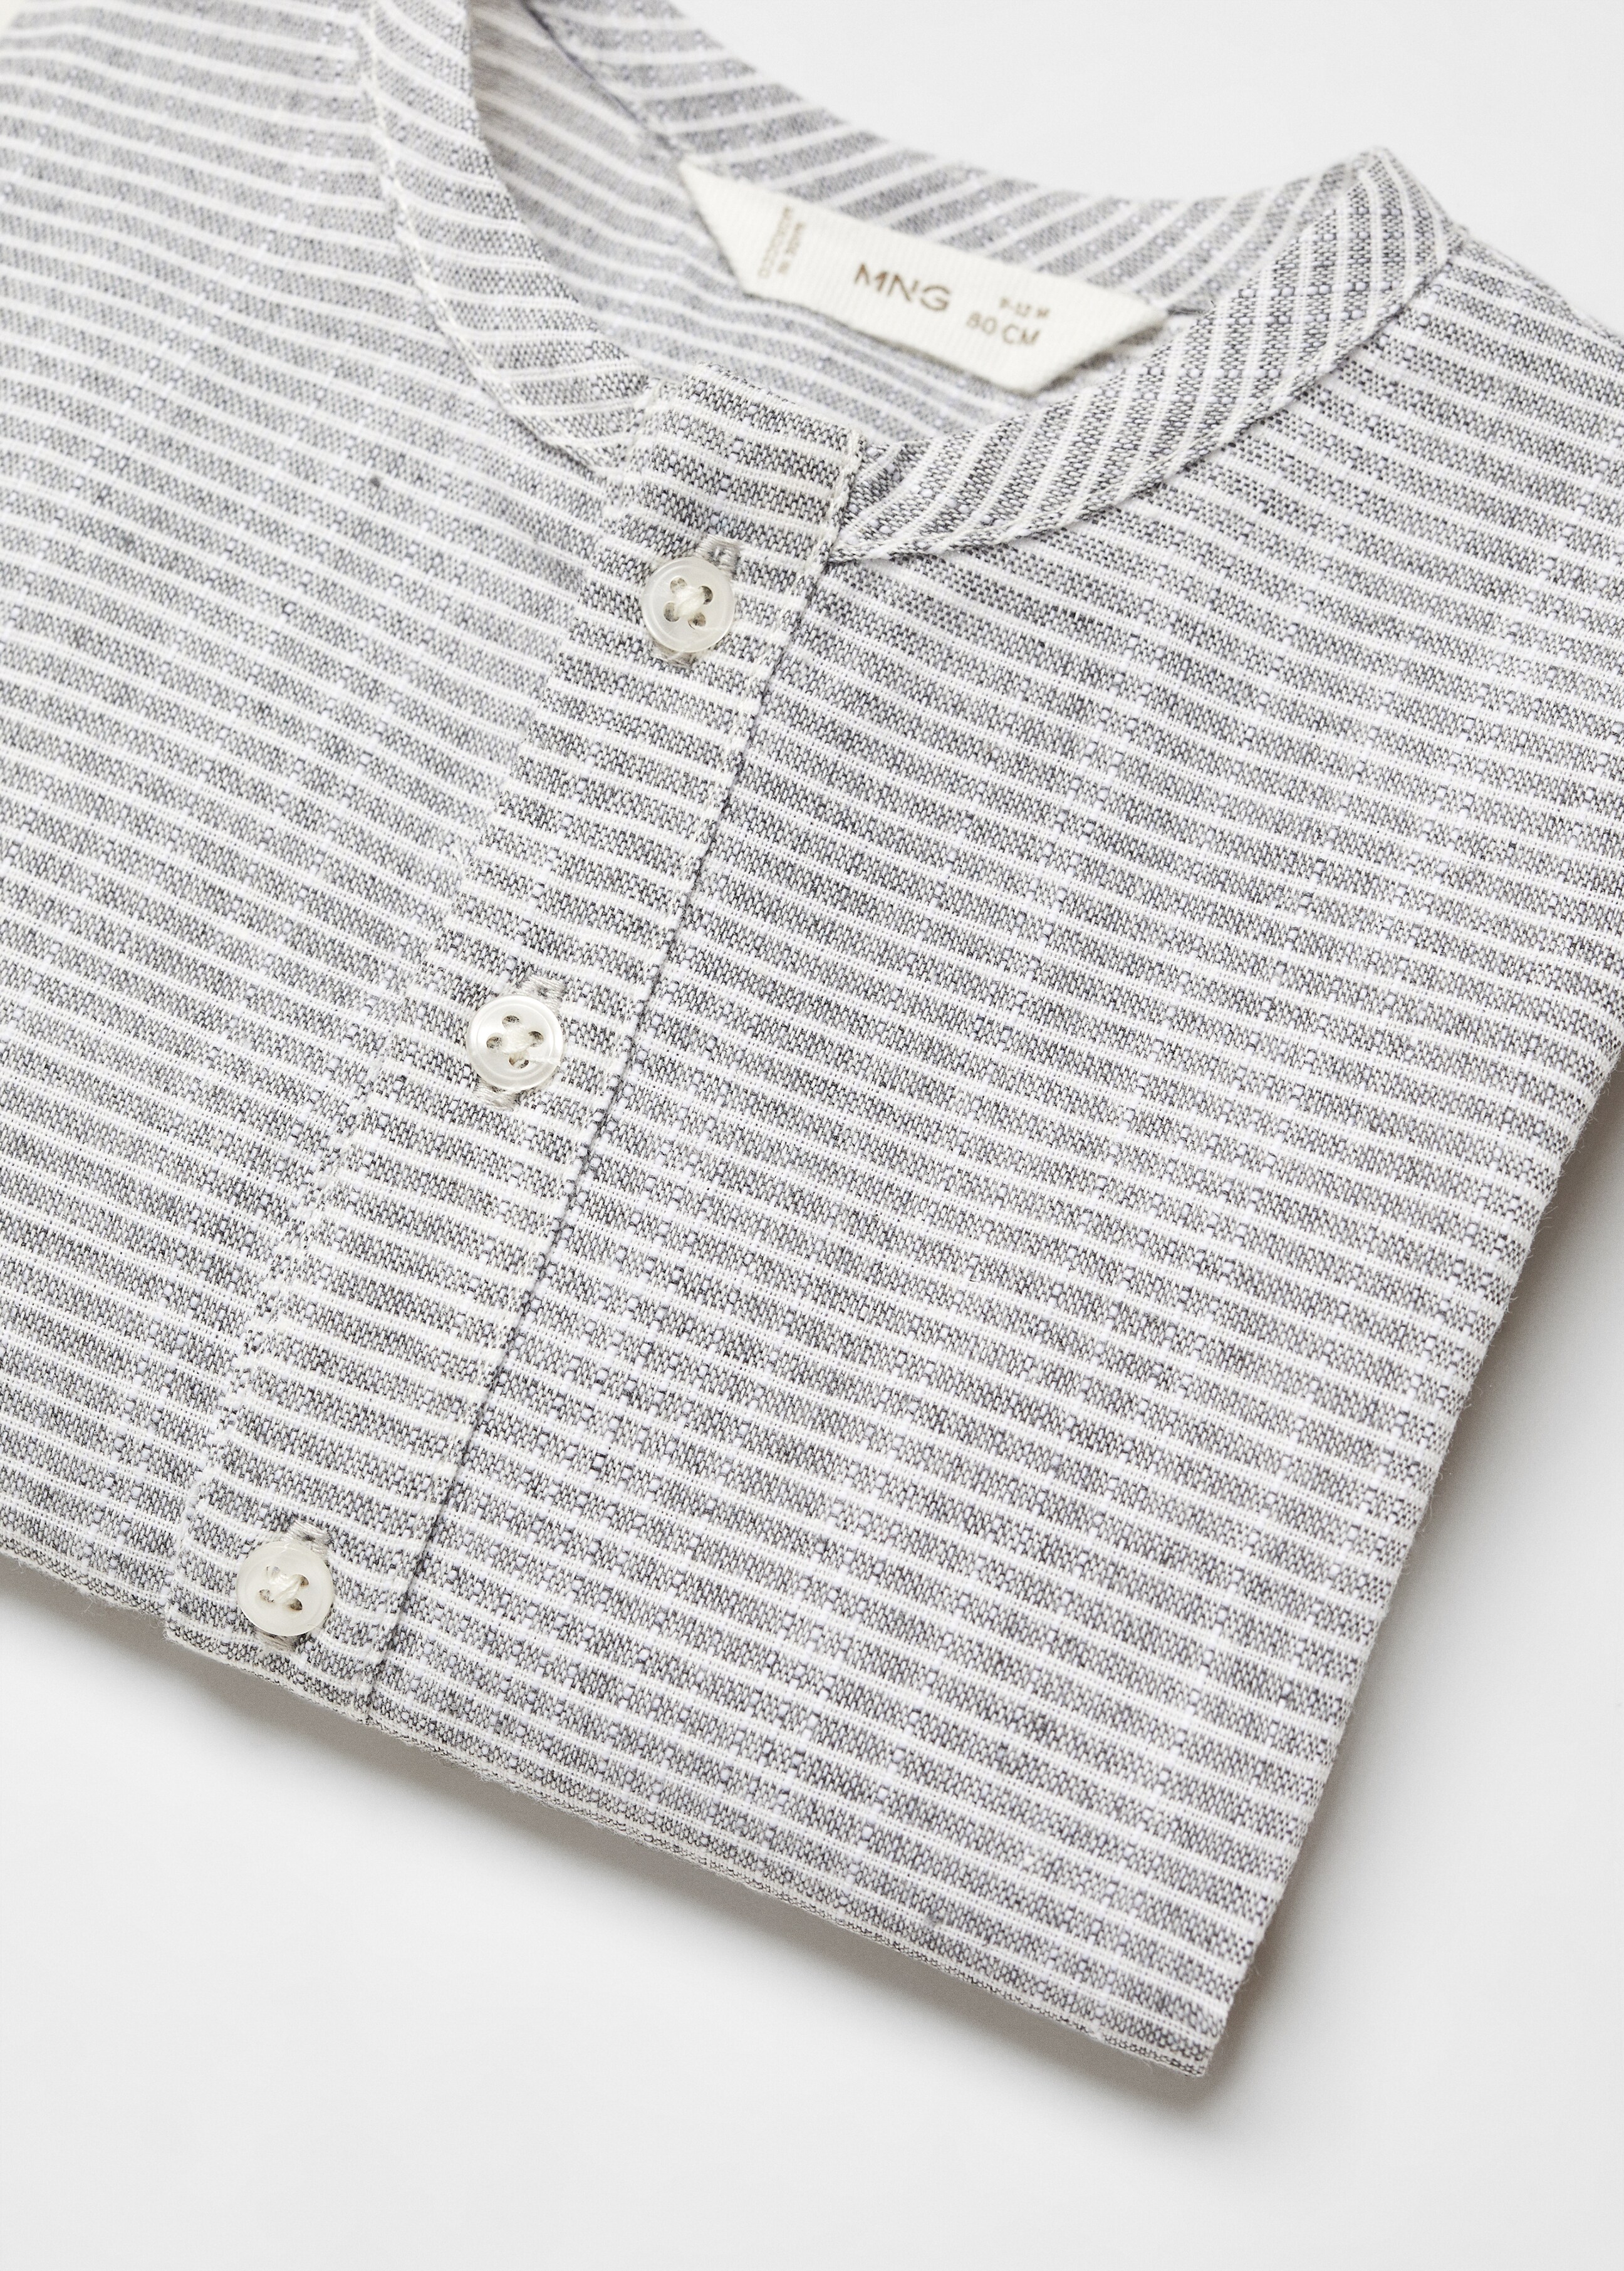 Striped shirt - Details of the article 0